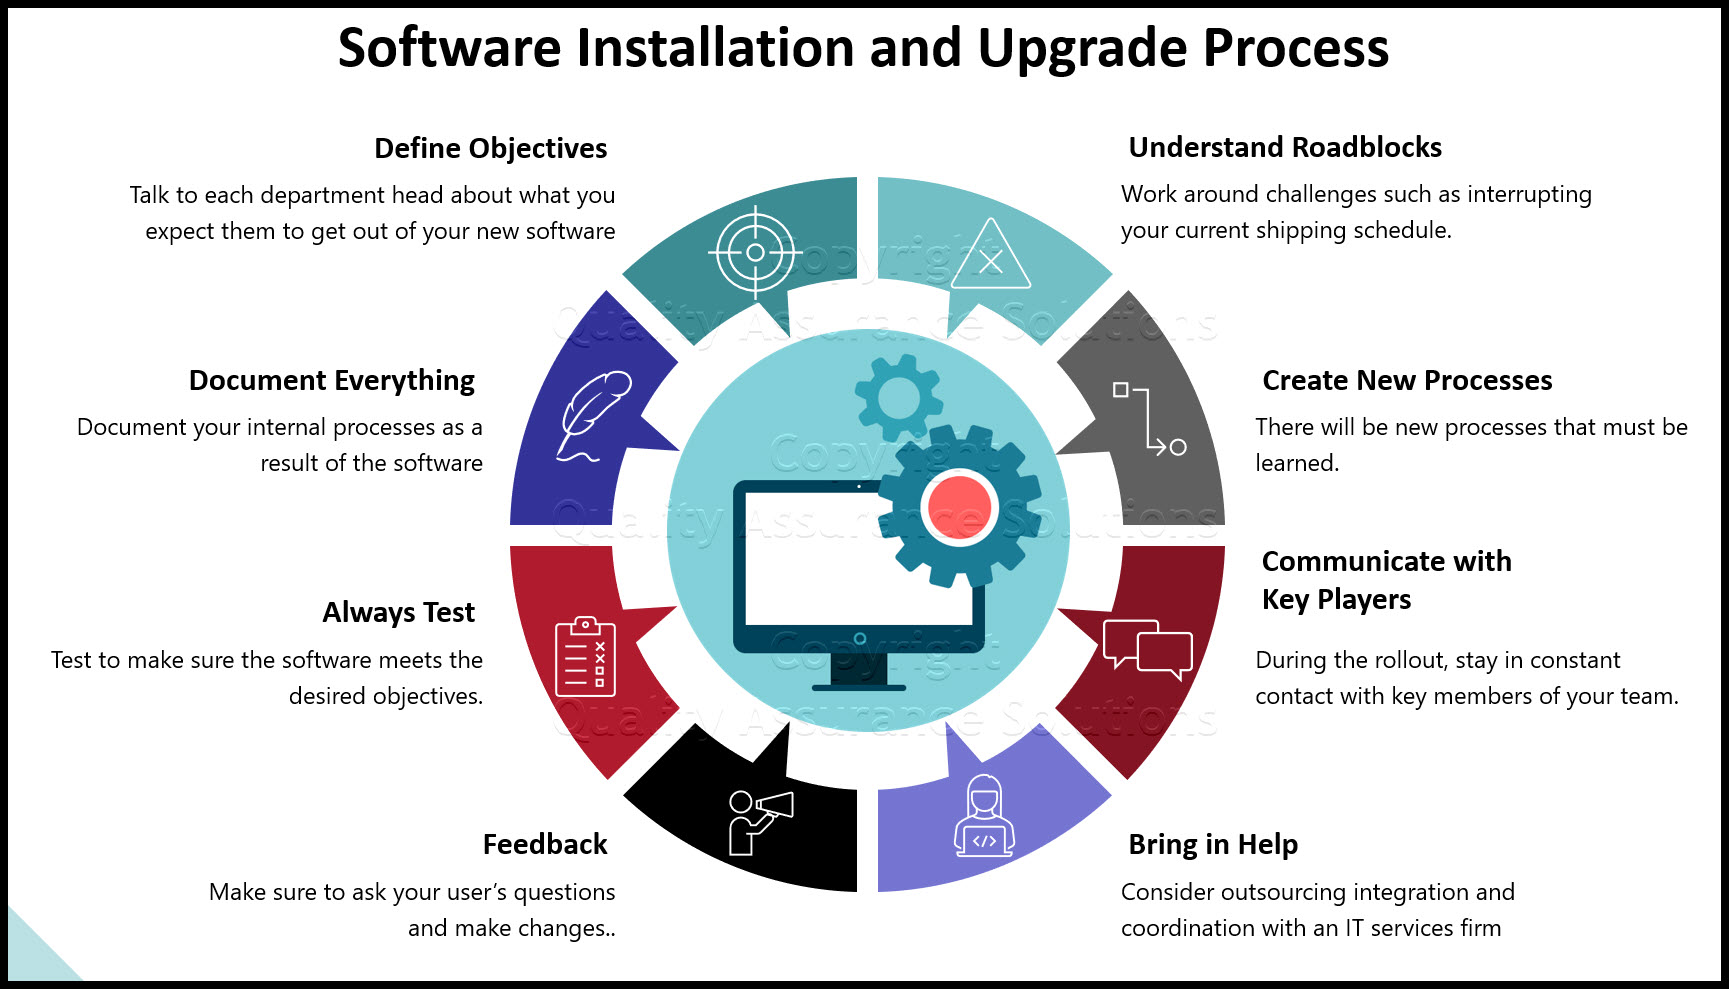 Learn the steps to conduct software installation and upgrade process within your business to prevent mishap.